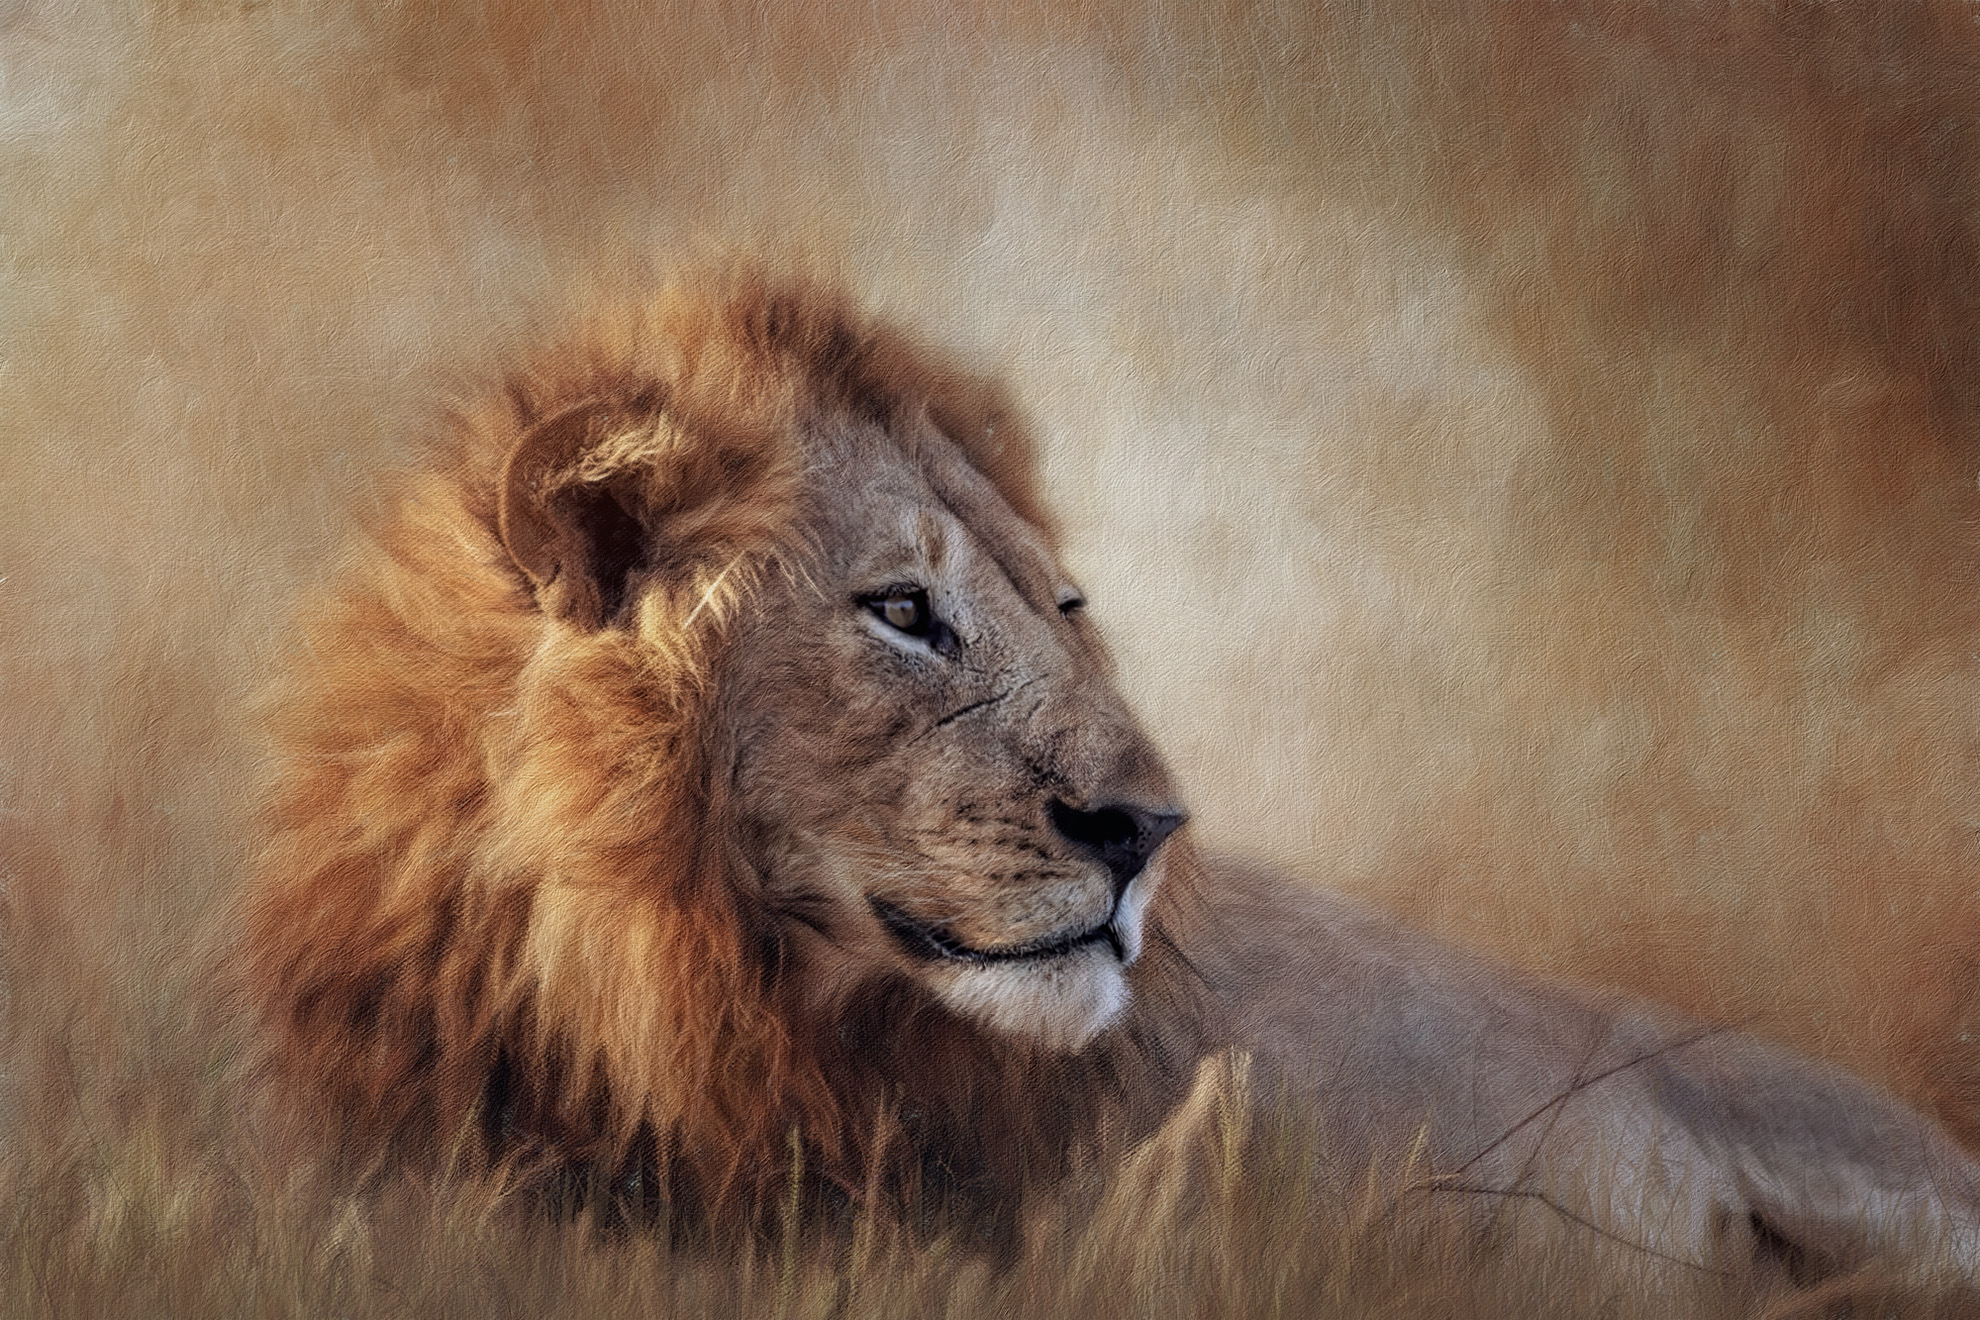 The lion denotes power, aggression and might.